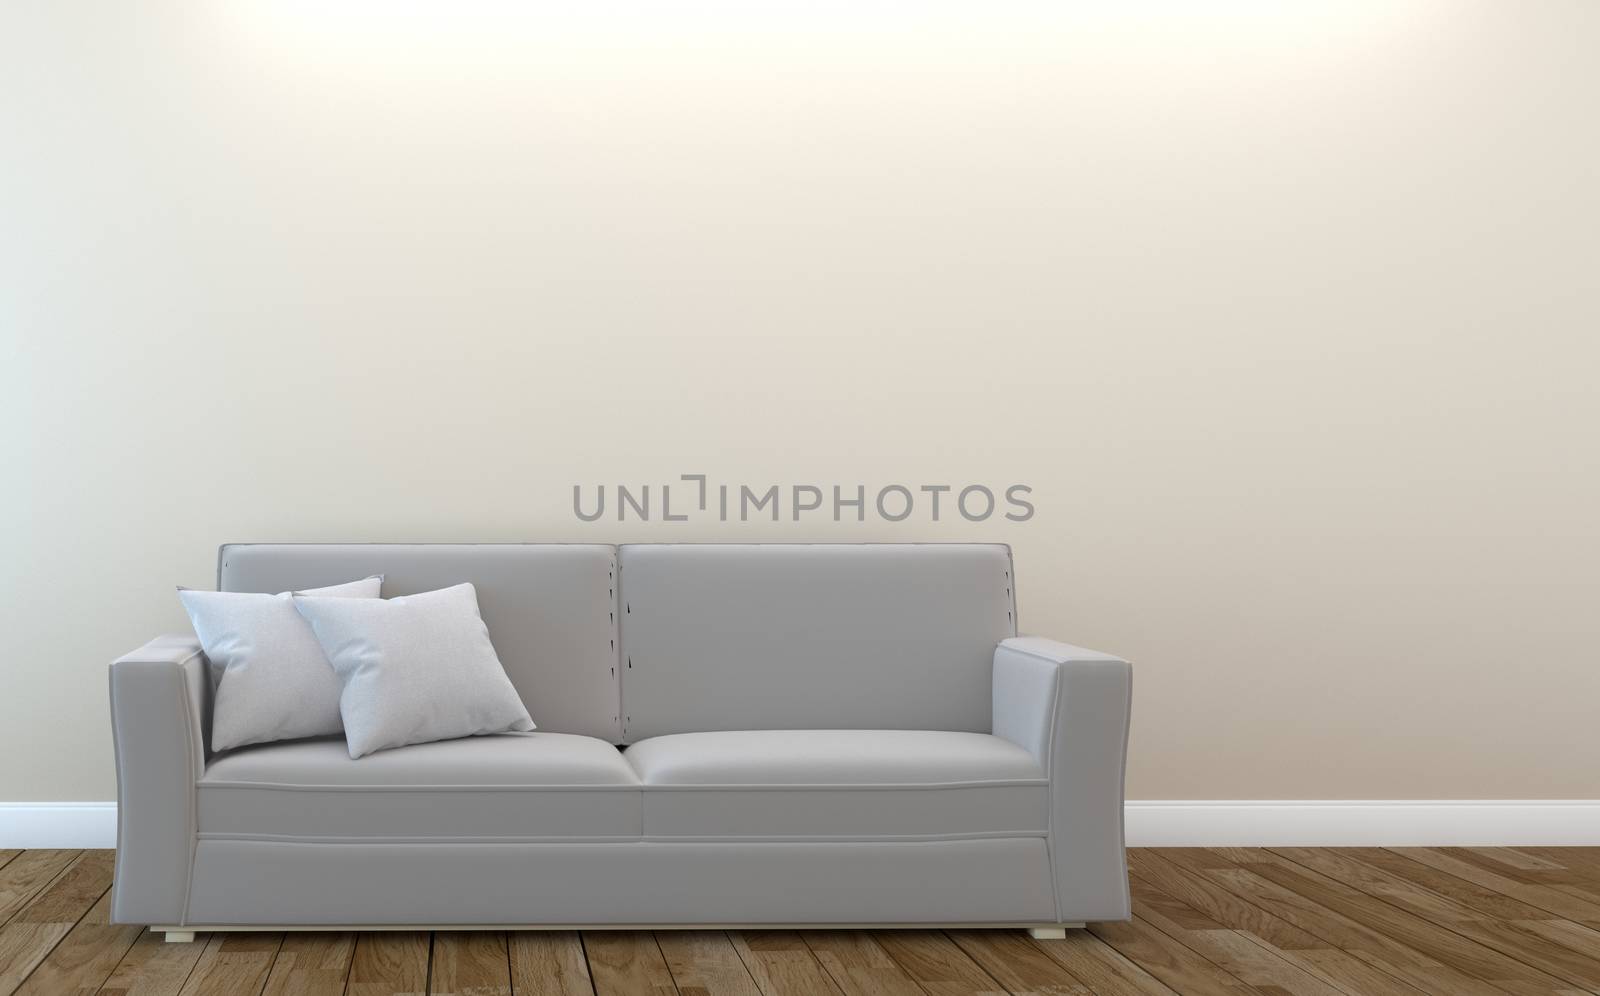 Room interior - Scandinavian style 3D rendering by Minny0012011@hotmail.com